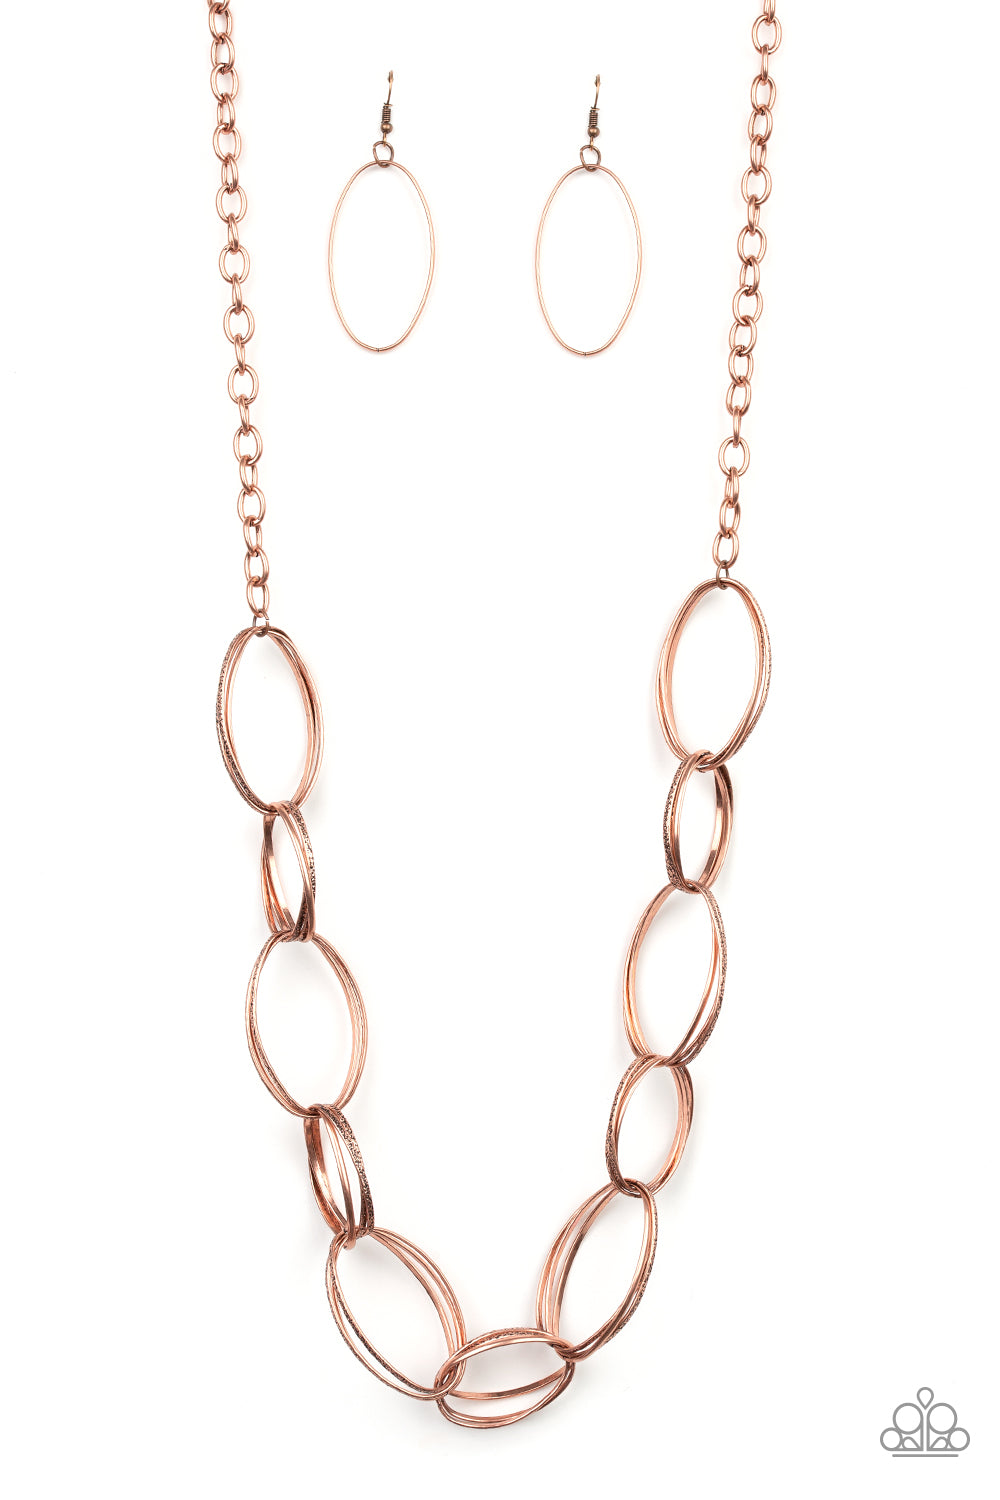 Ring Bling Copper Necklace